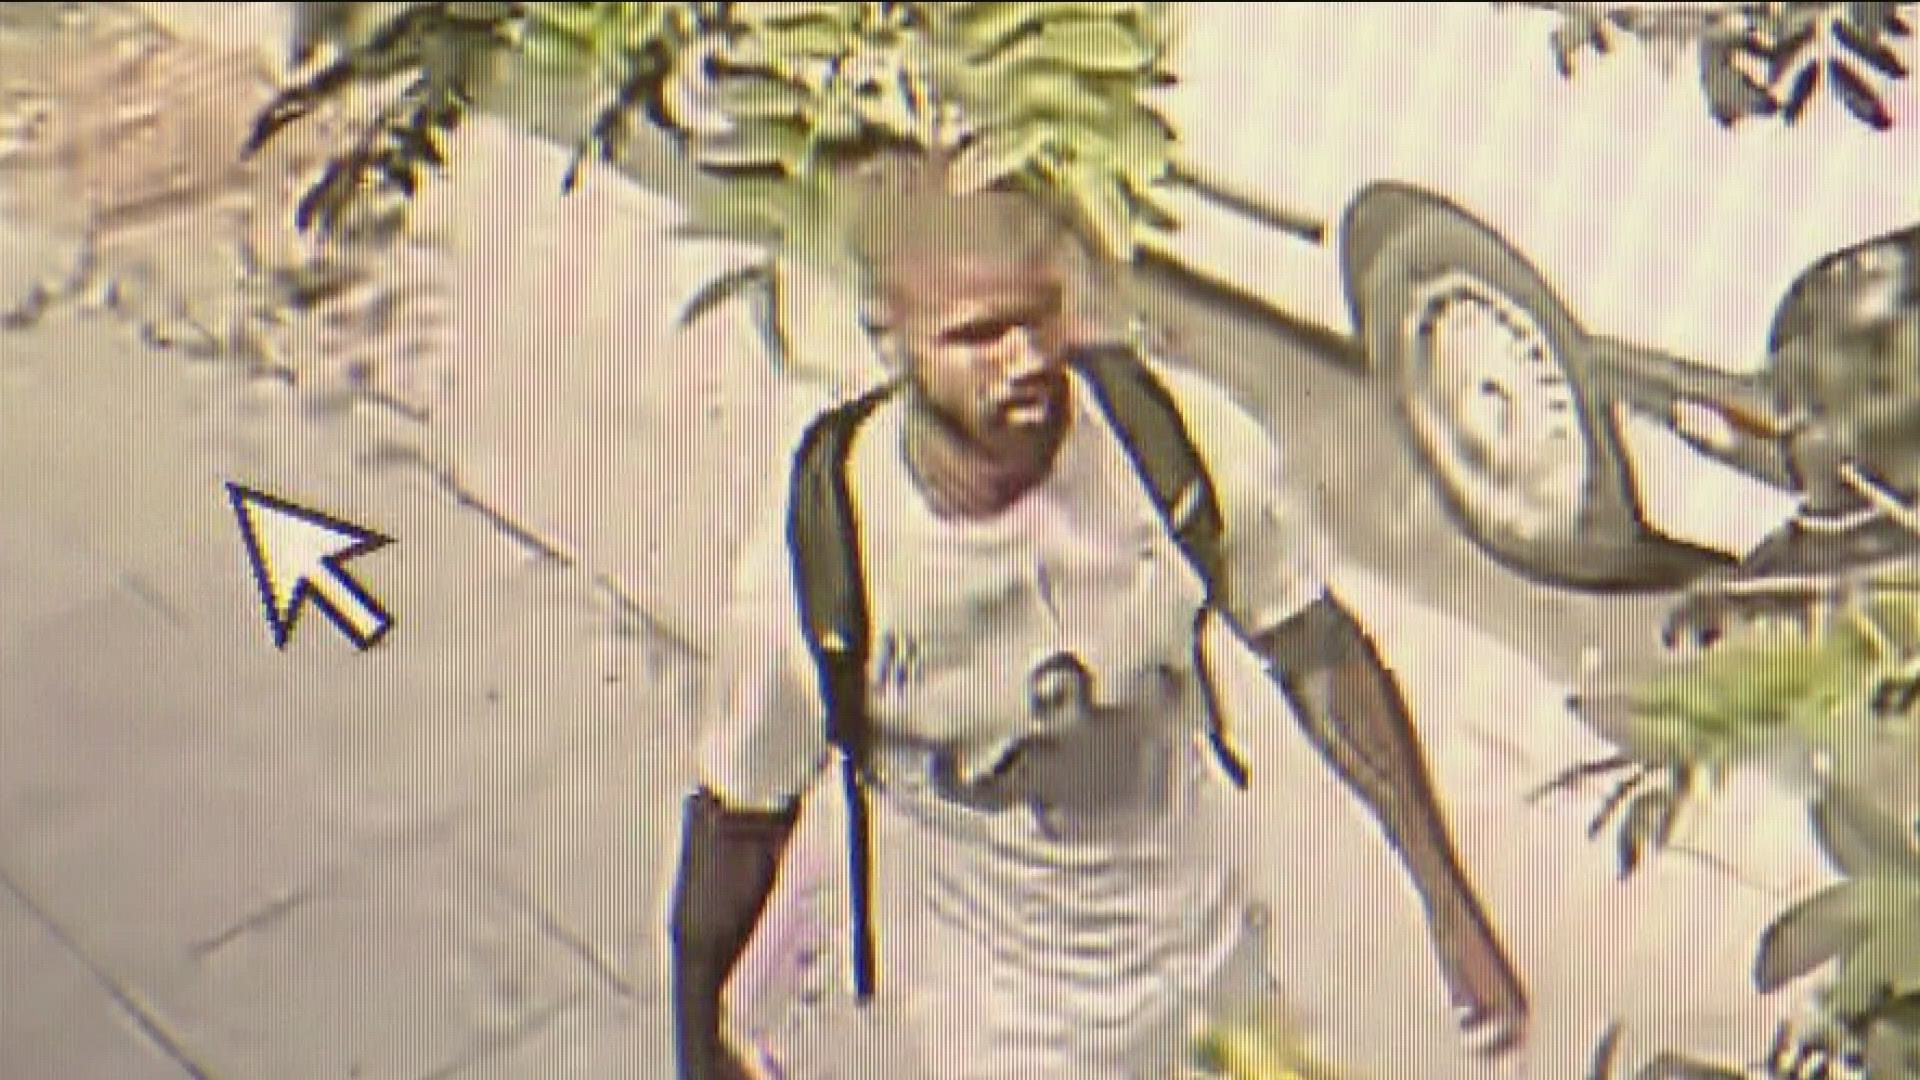 Police searching for man who attacked another man and tried to steal e-bike Wednesday afternoon.